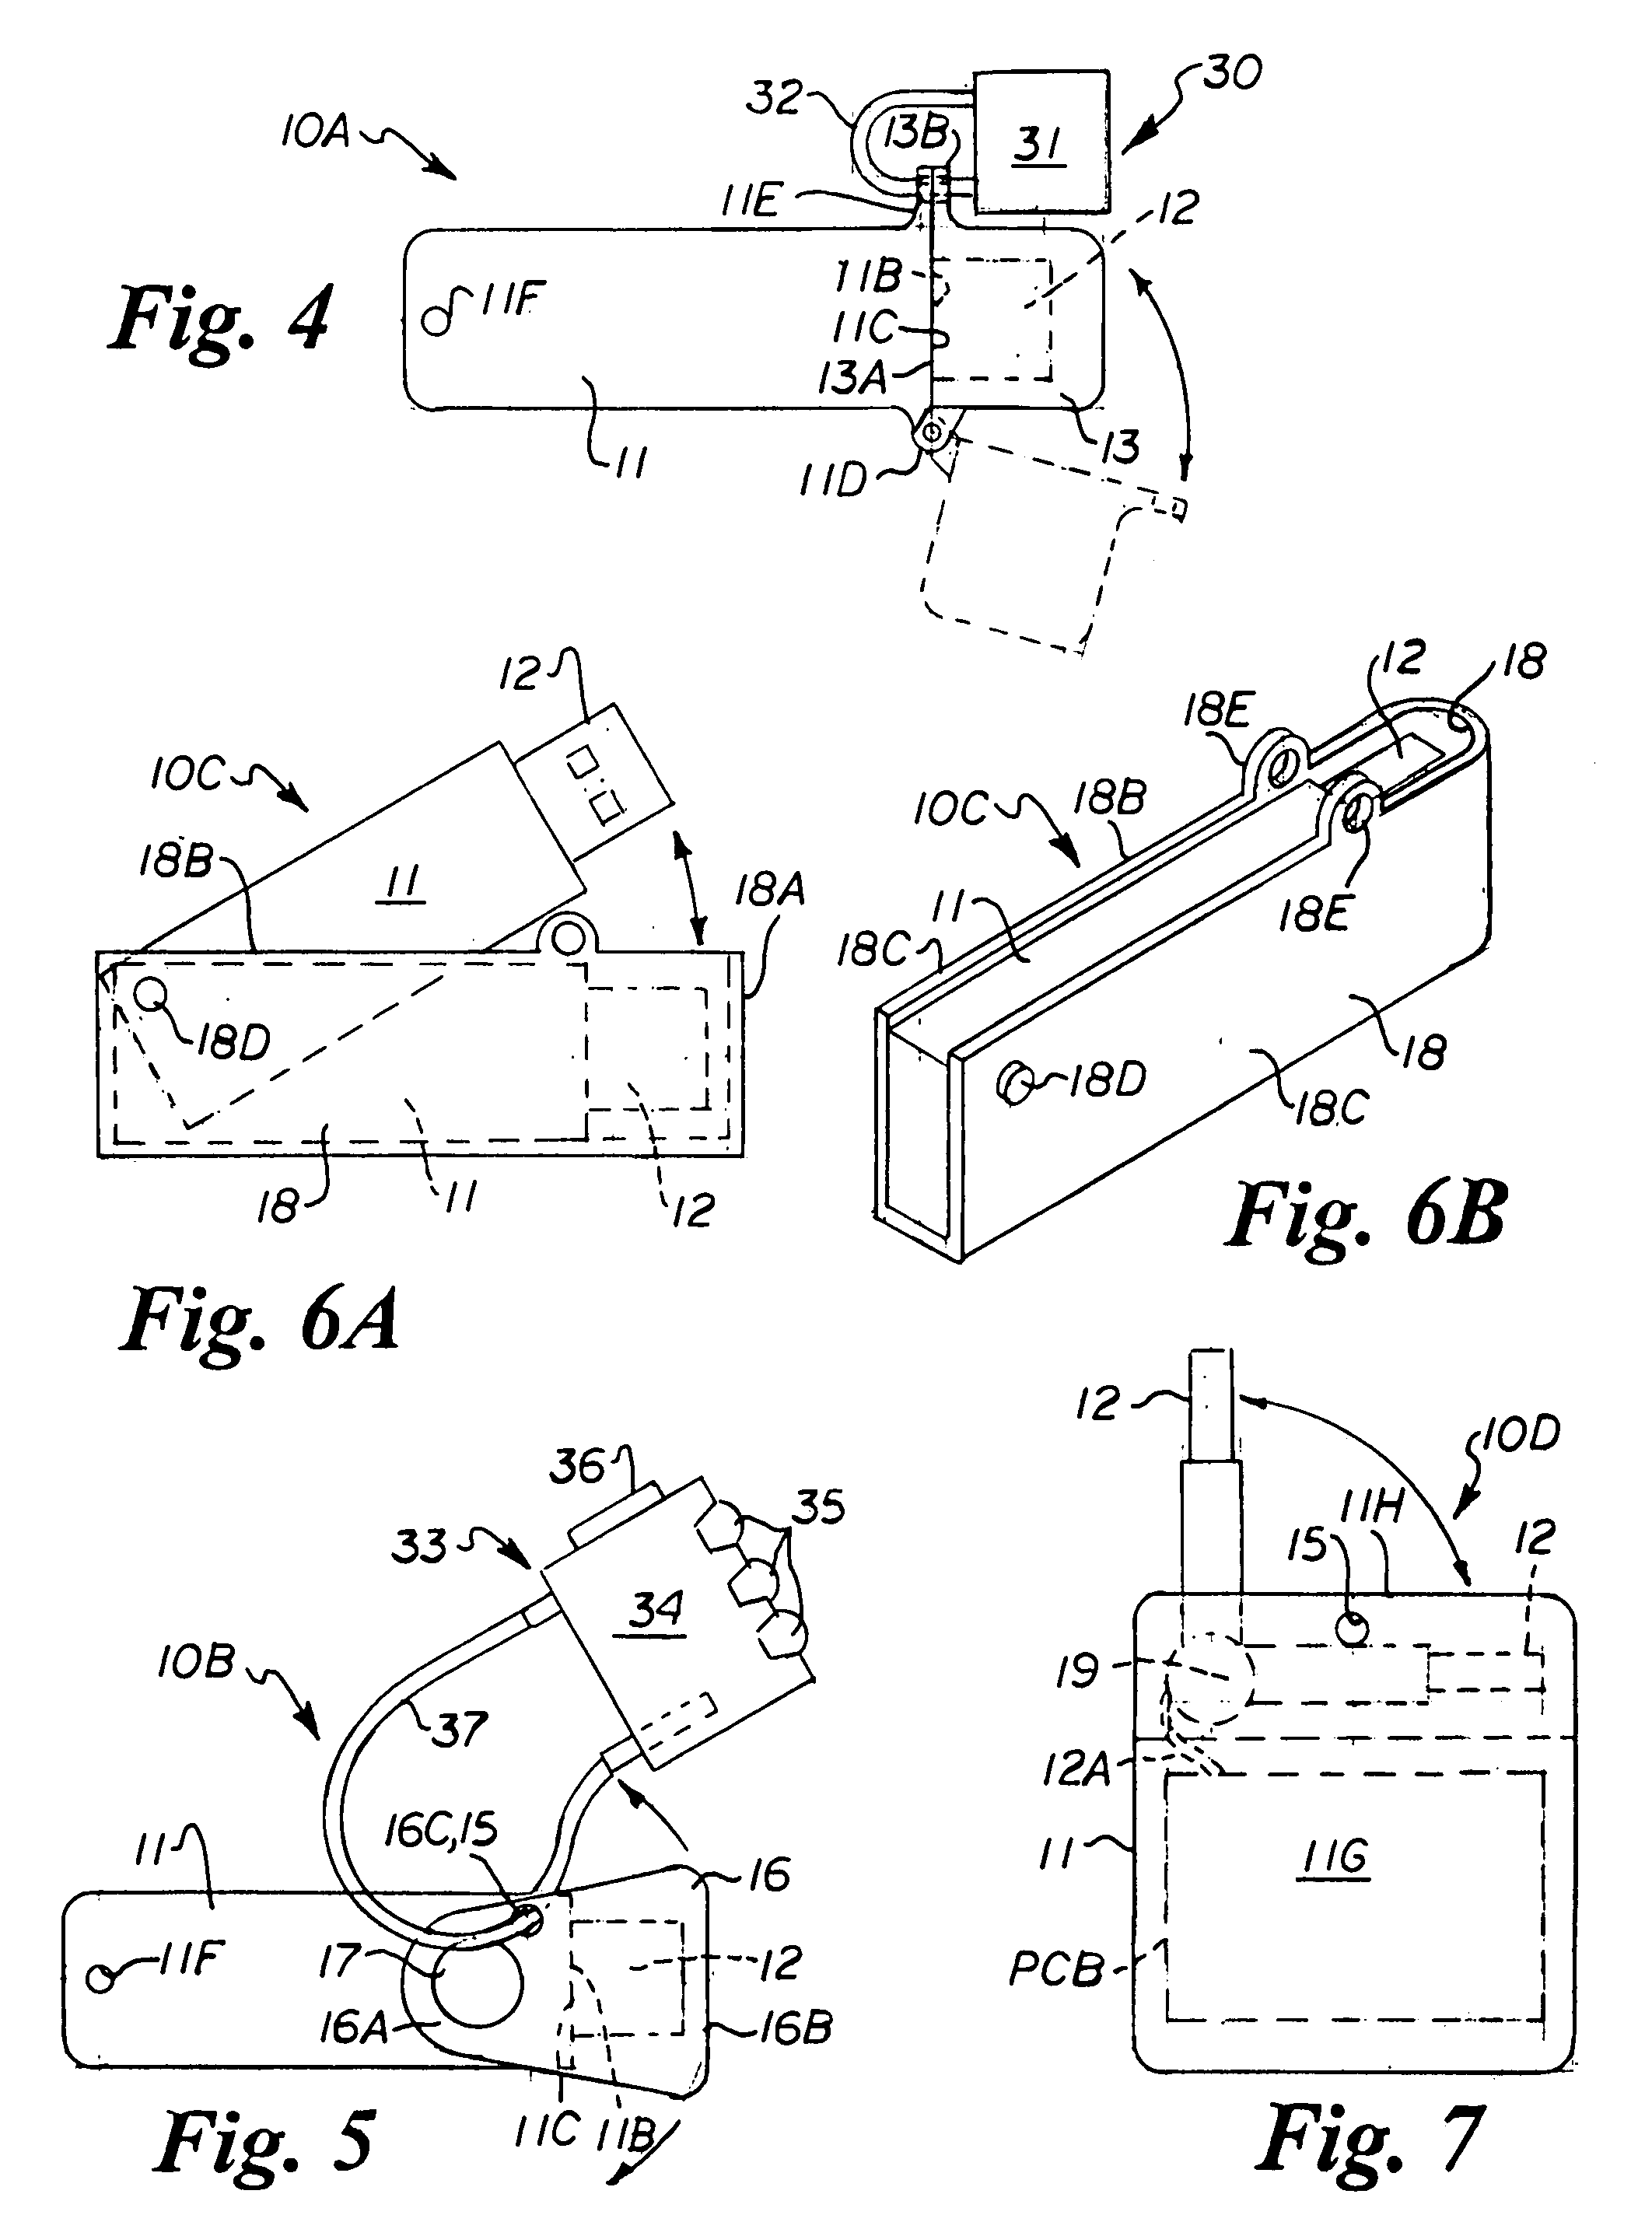 Lockable portable memory storage devices with serial bus connectors and locking system therefor